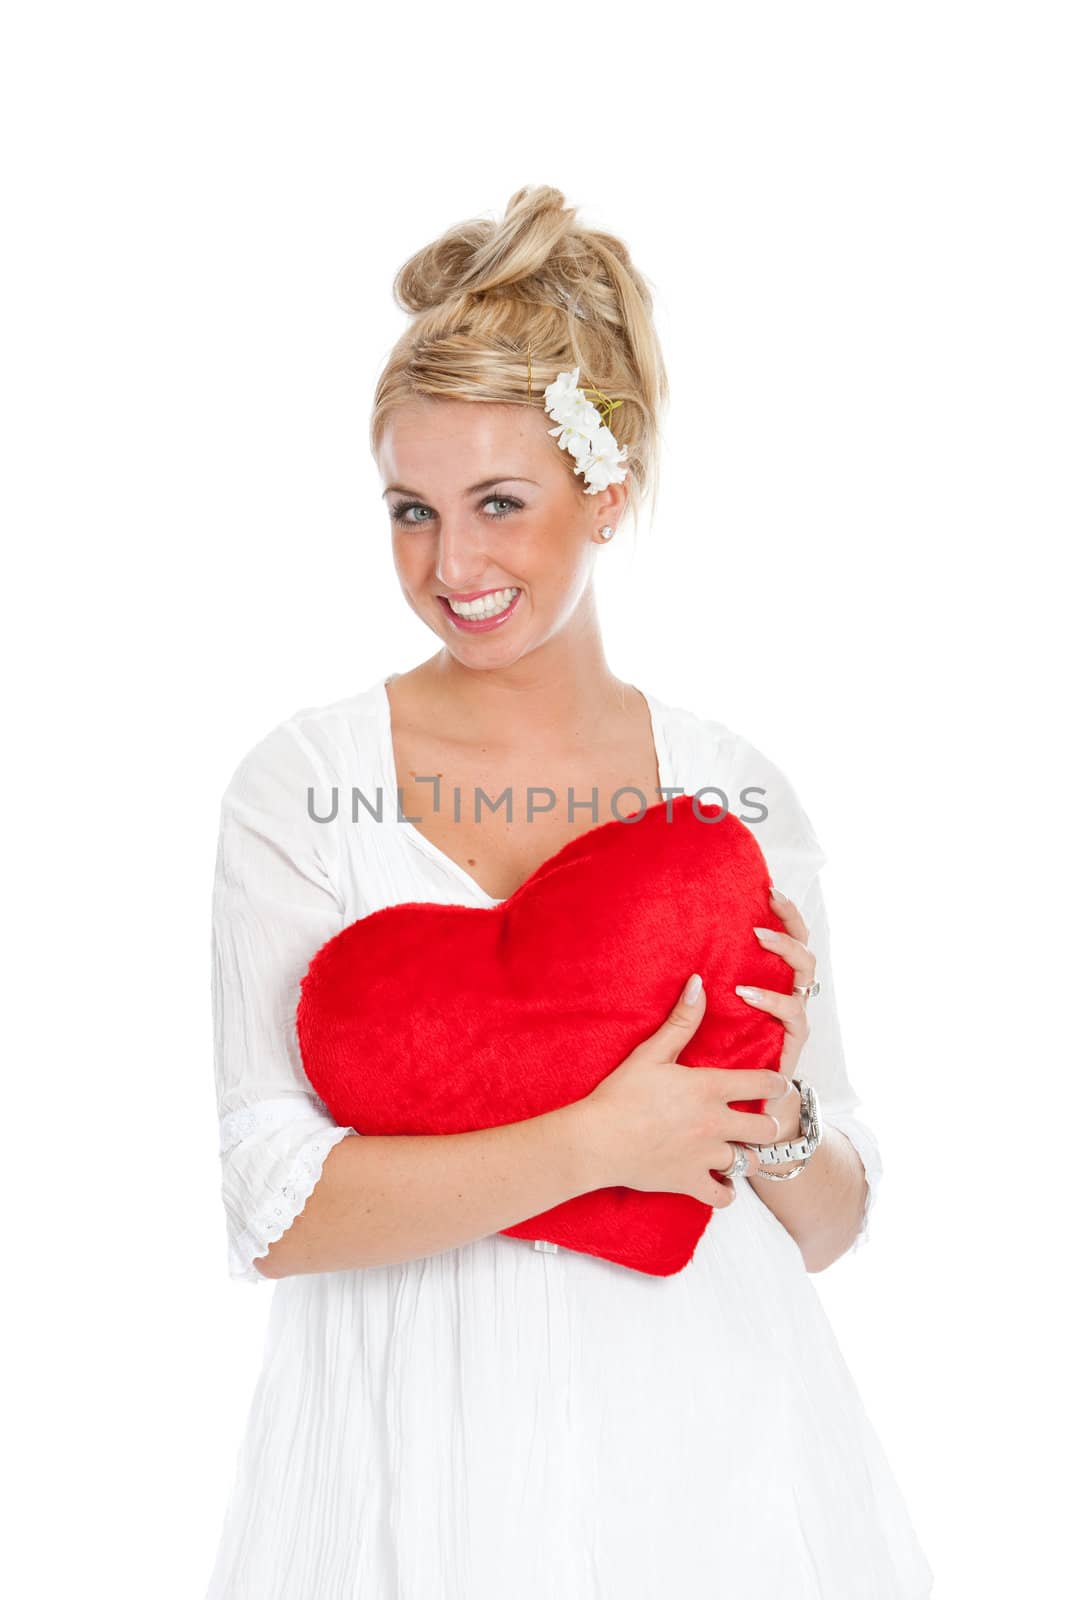 Pretty girl with big smile holding a red valentine heart